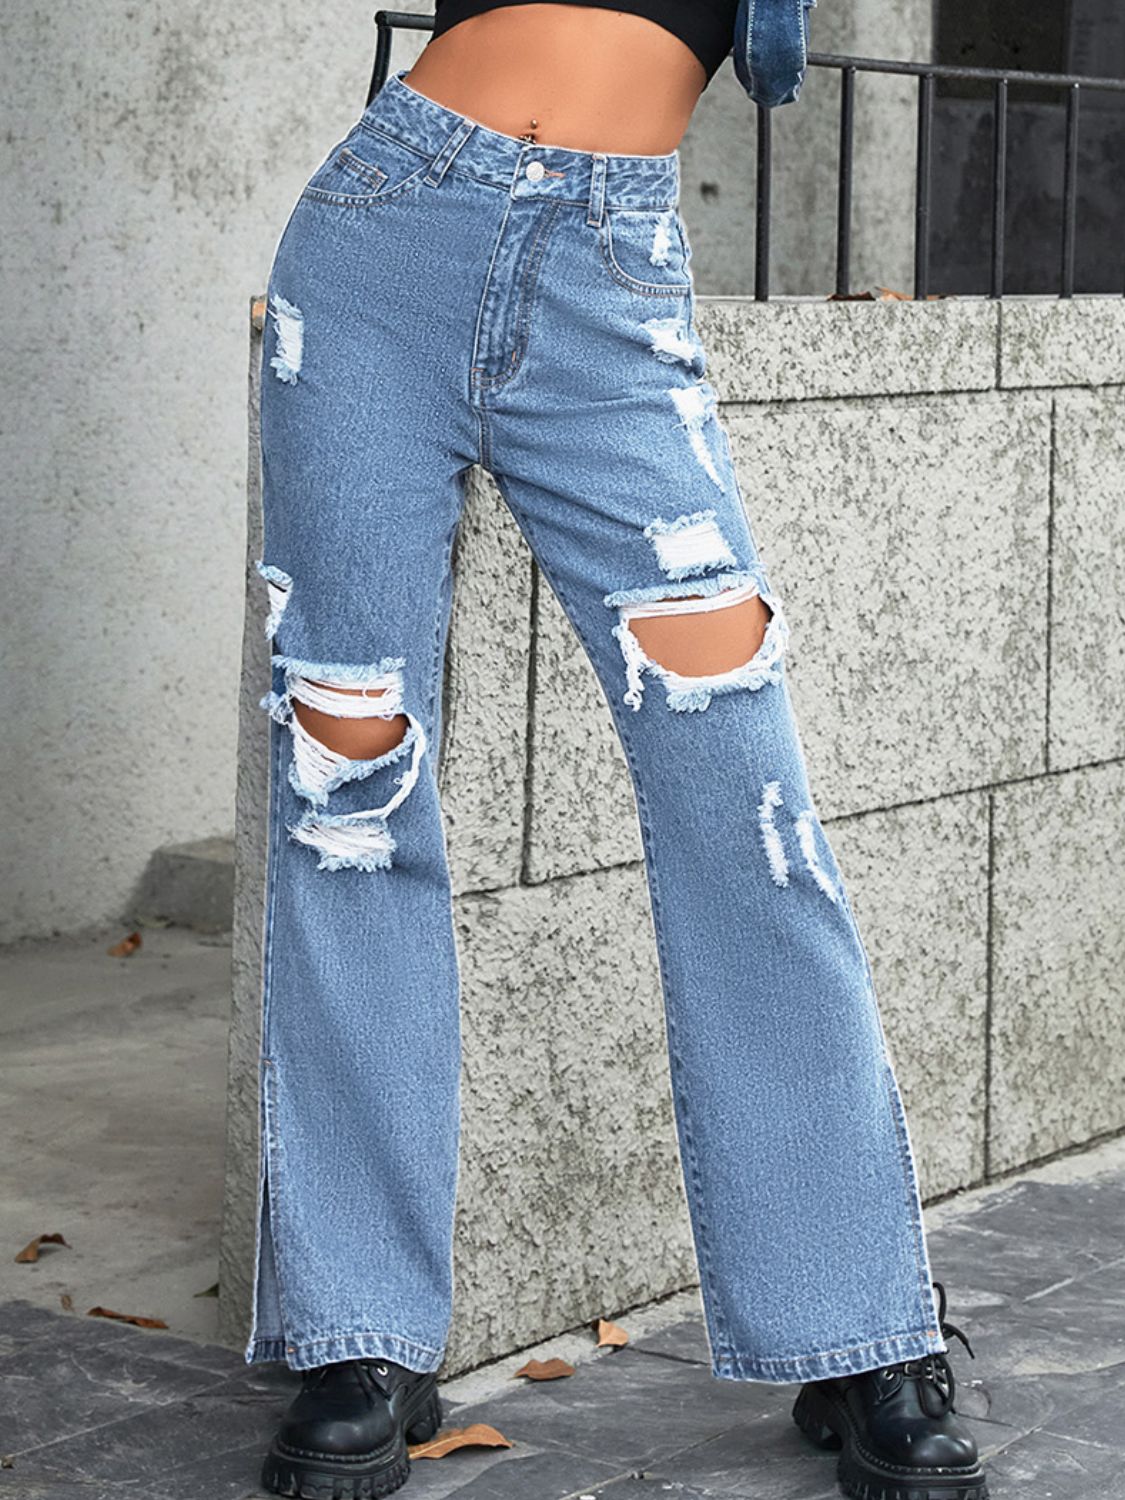 TOTO Ripped Jeans Bell Bottom Jeans For Women High Waist Jeans Button  Tassel Pants Trousers Bell Bottom Pants